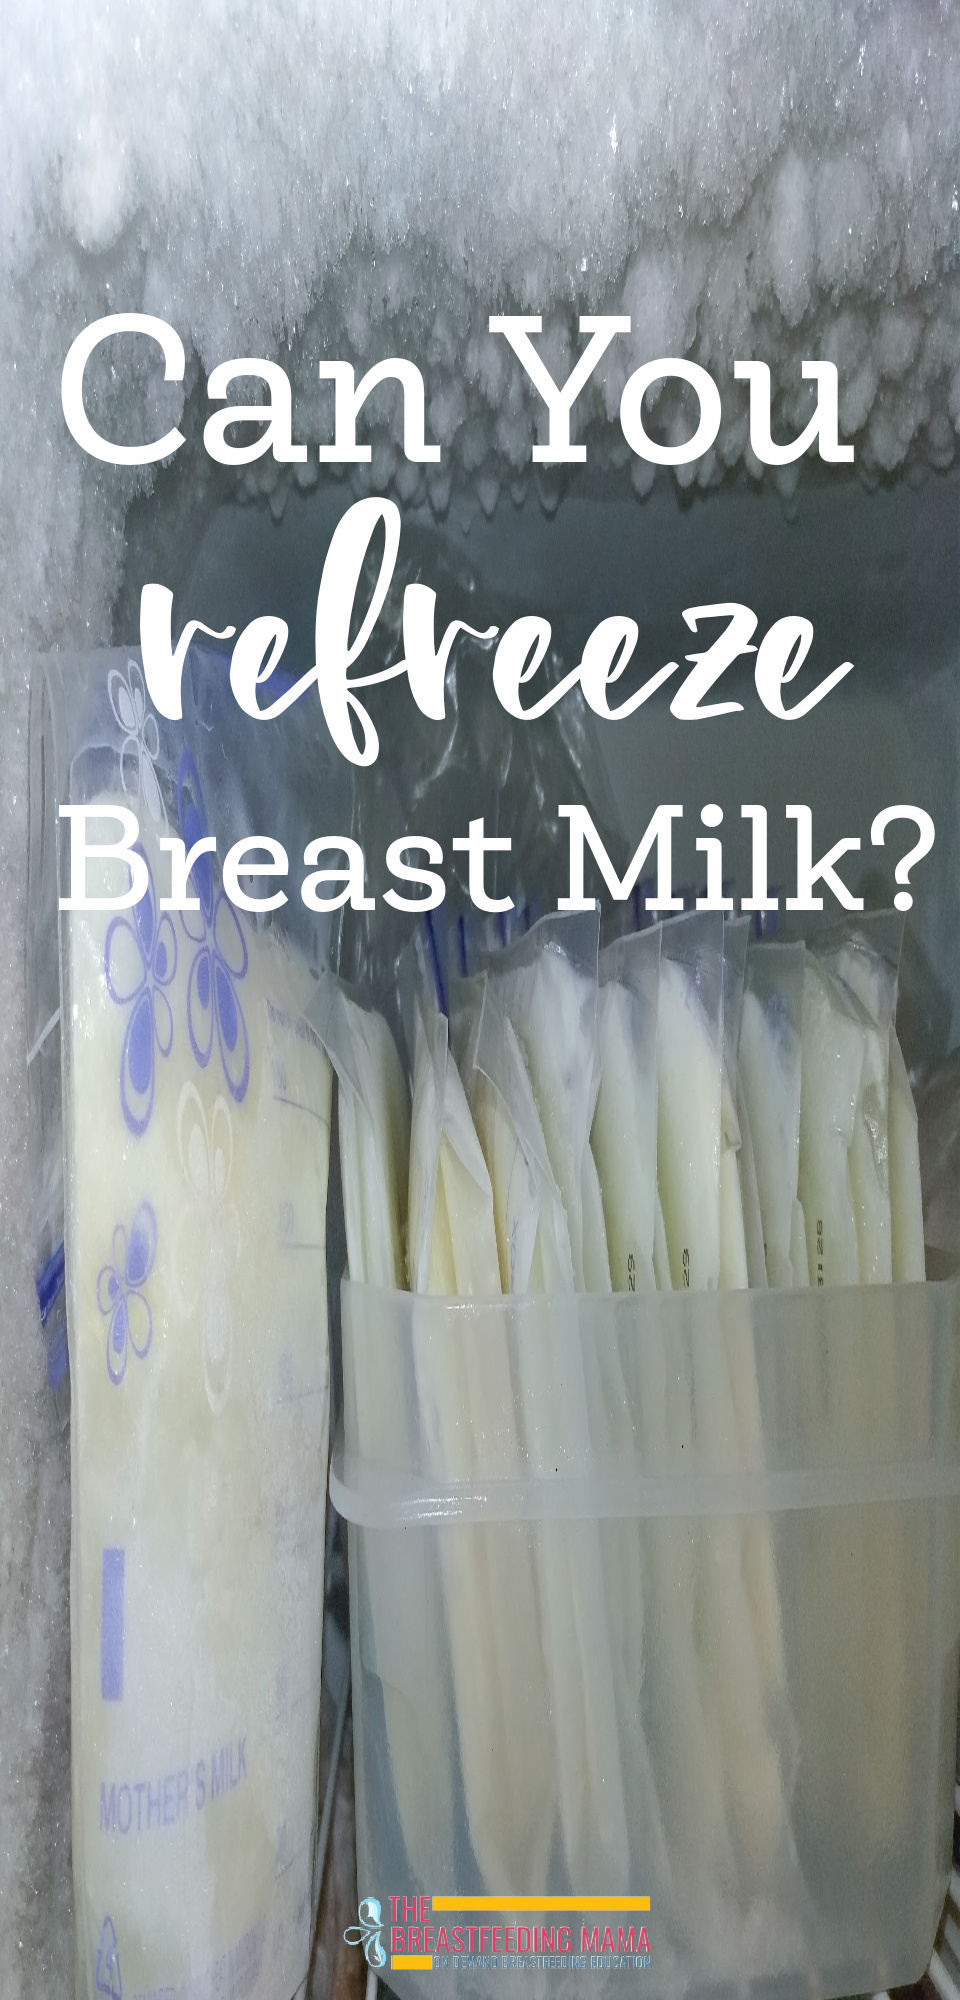 Can you refreeze your breast milk? Here are some tips for breast milk storage when you've defrosted your milk!